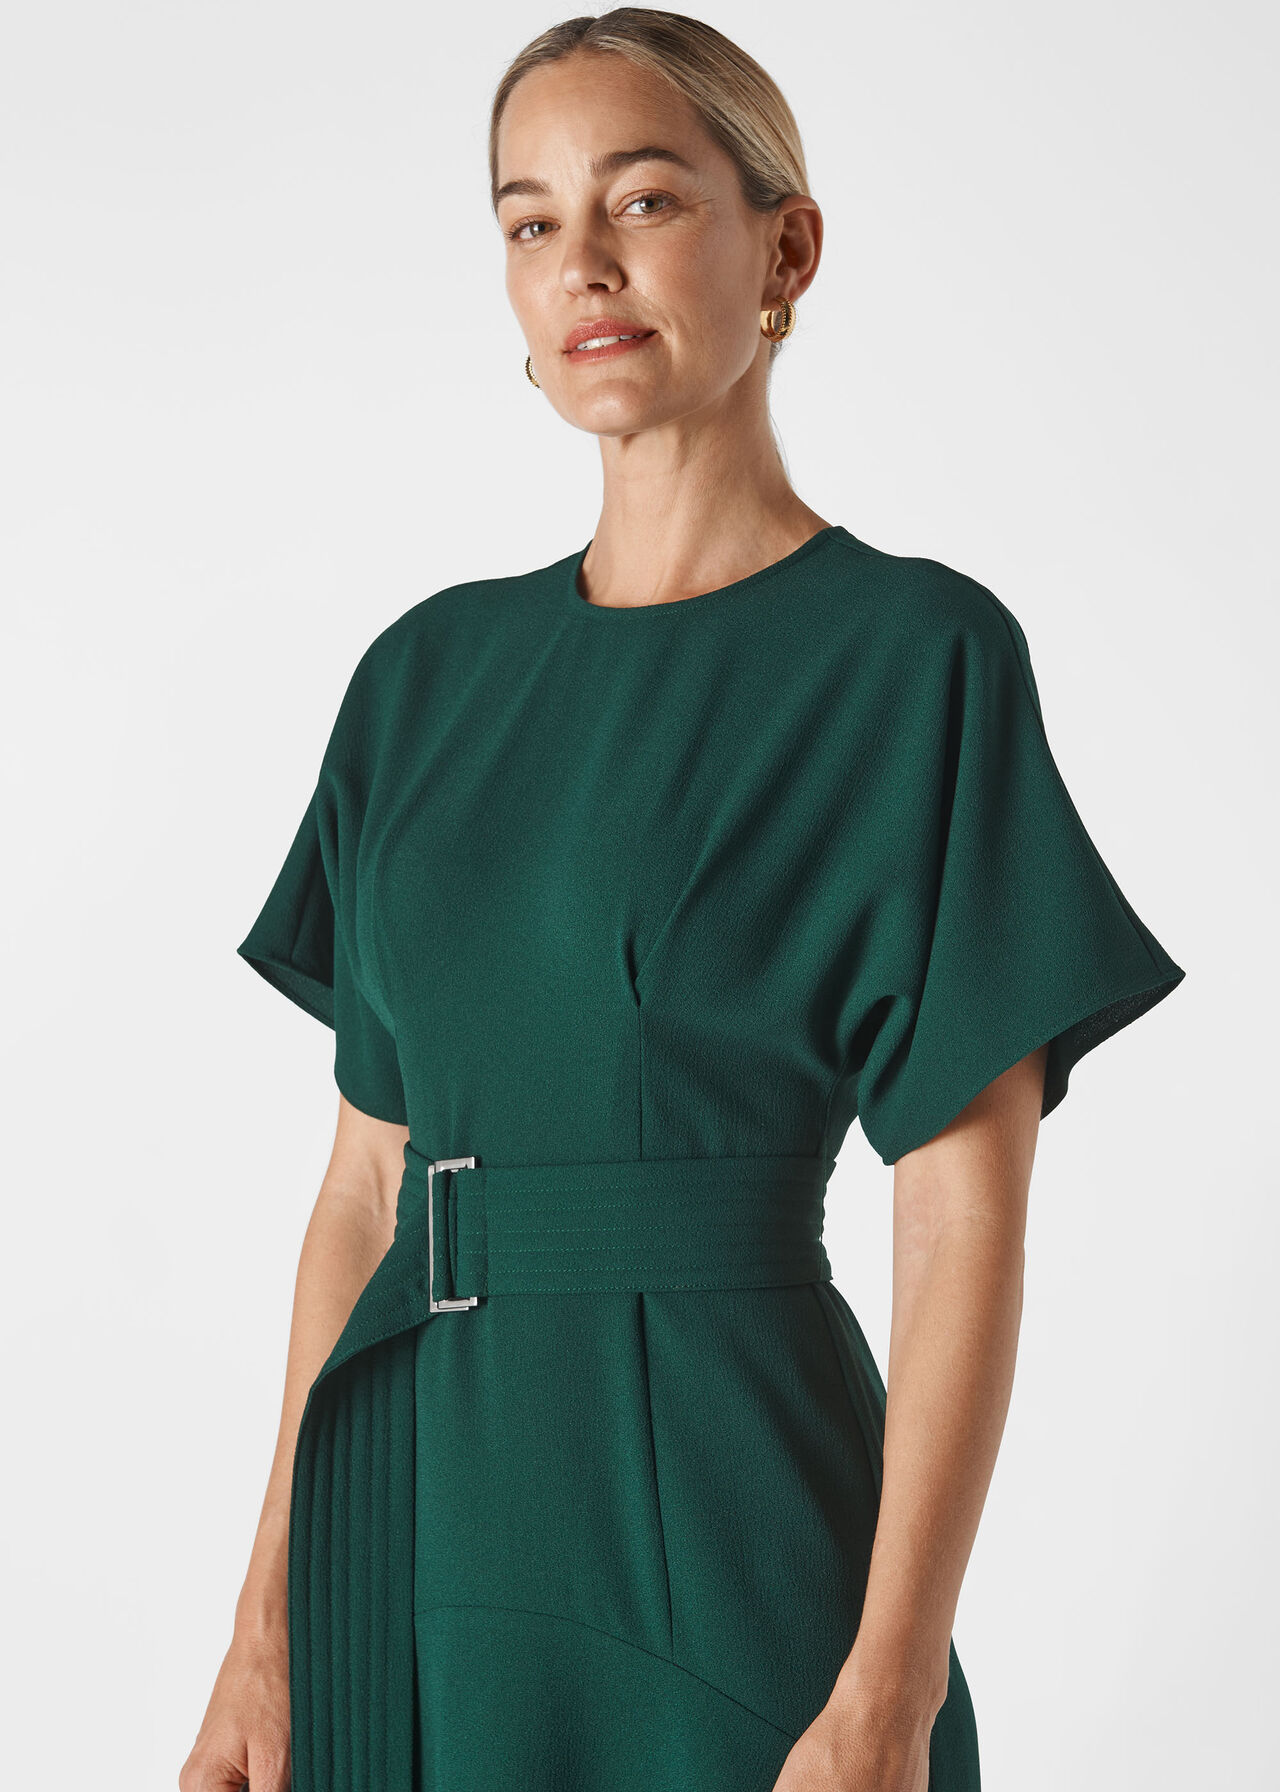 Green Textured Belted Midi Dress | WHISTLES